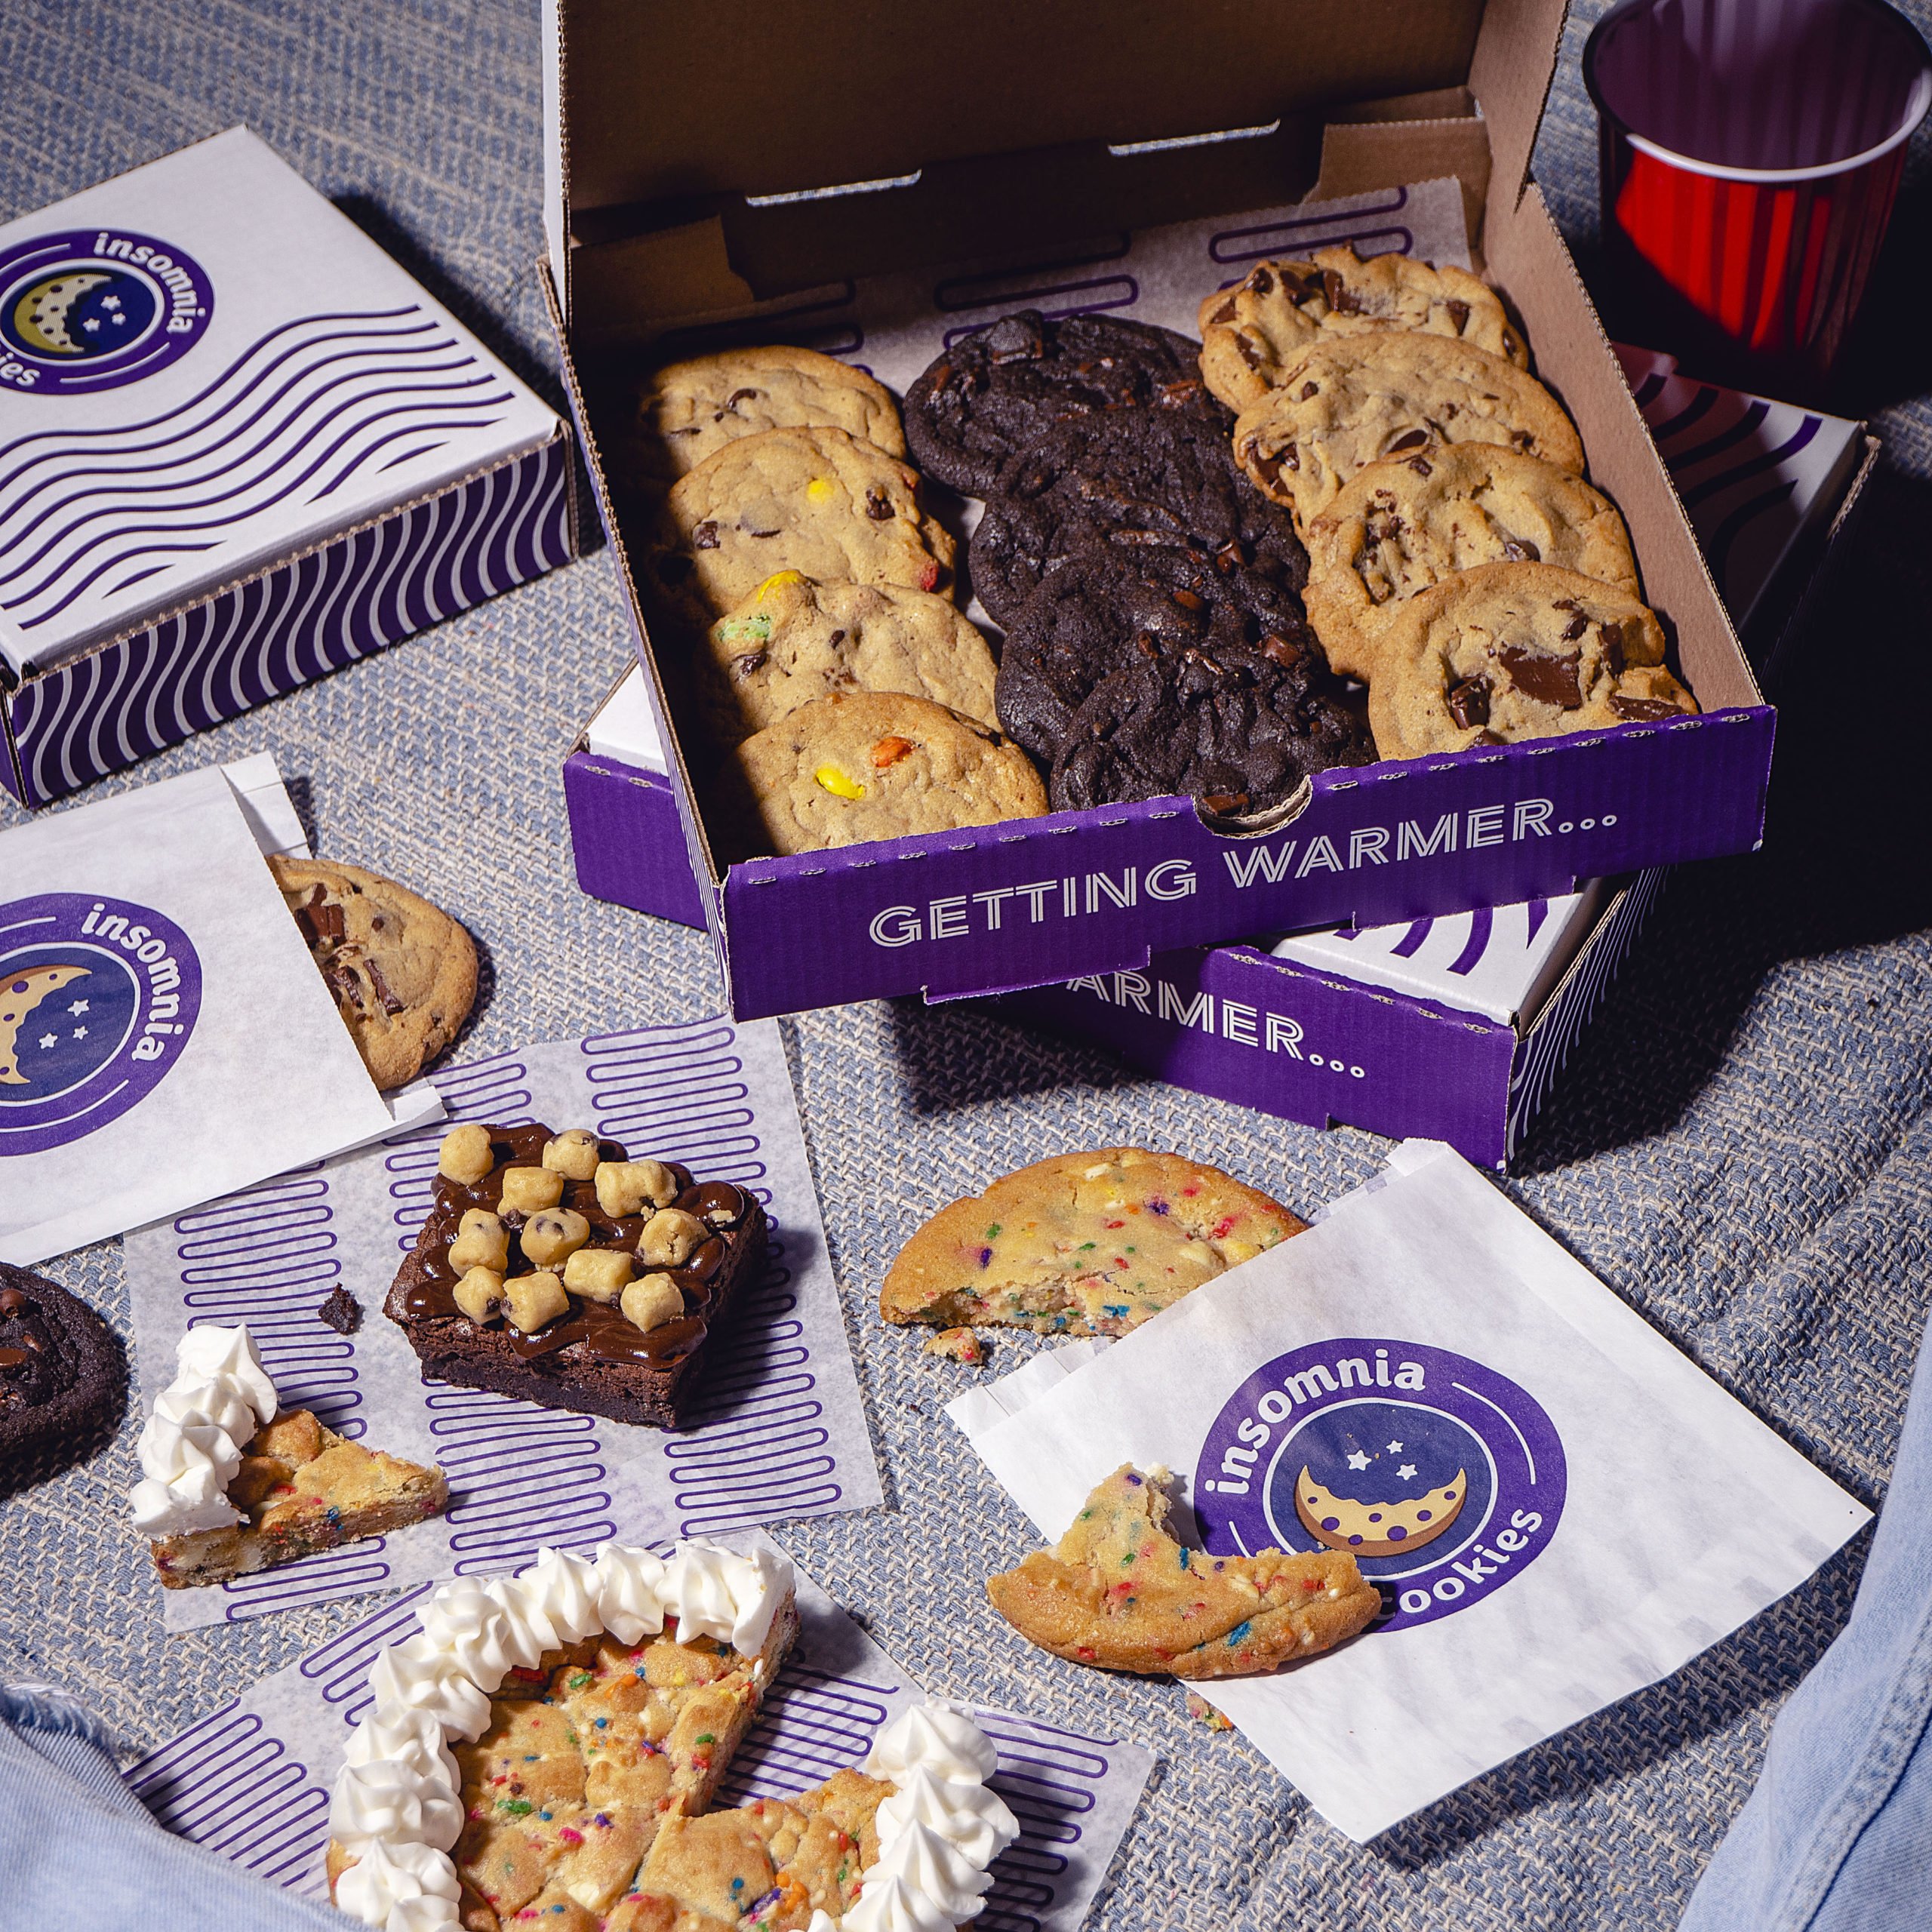 Insomnia Cookies Plans First Stores Outside U.S.